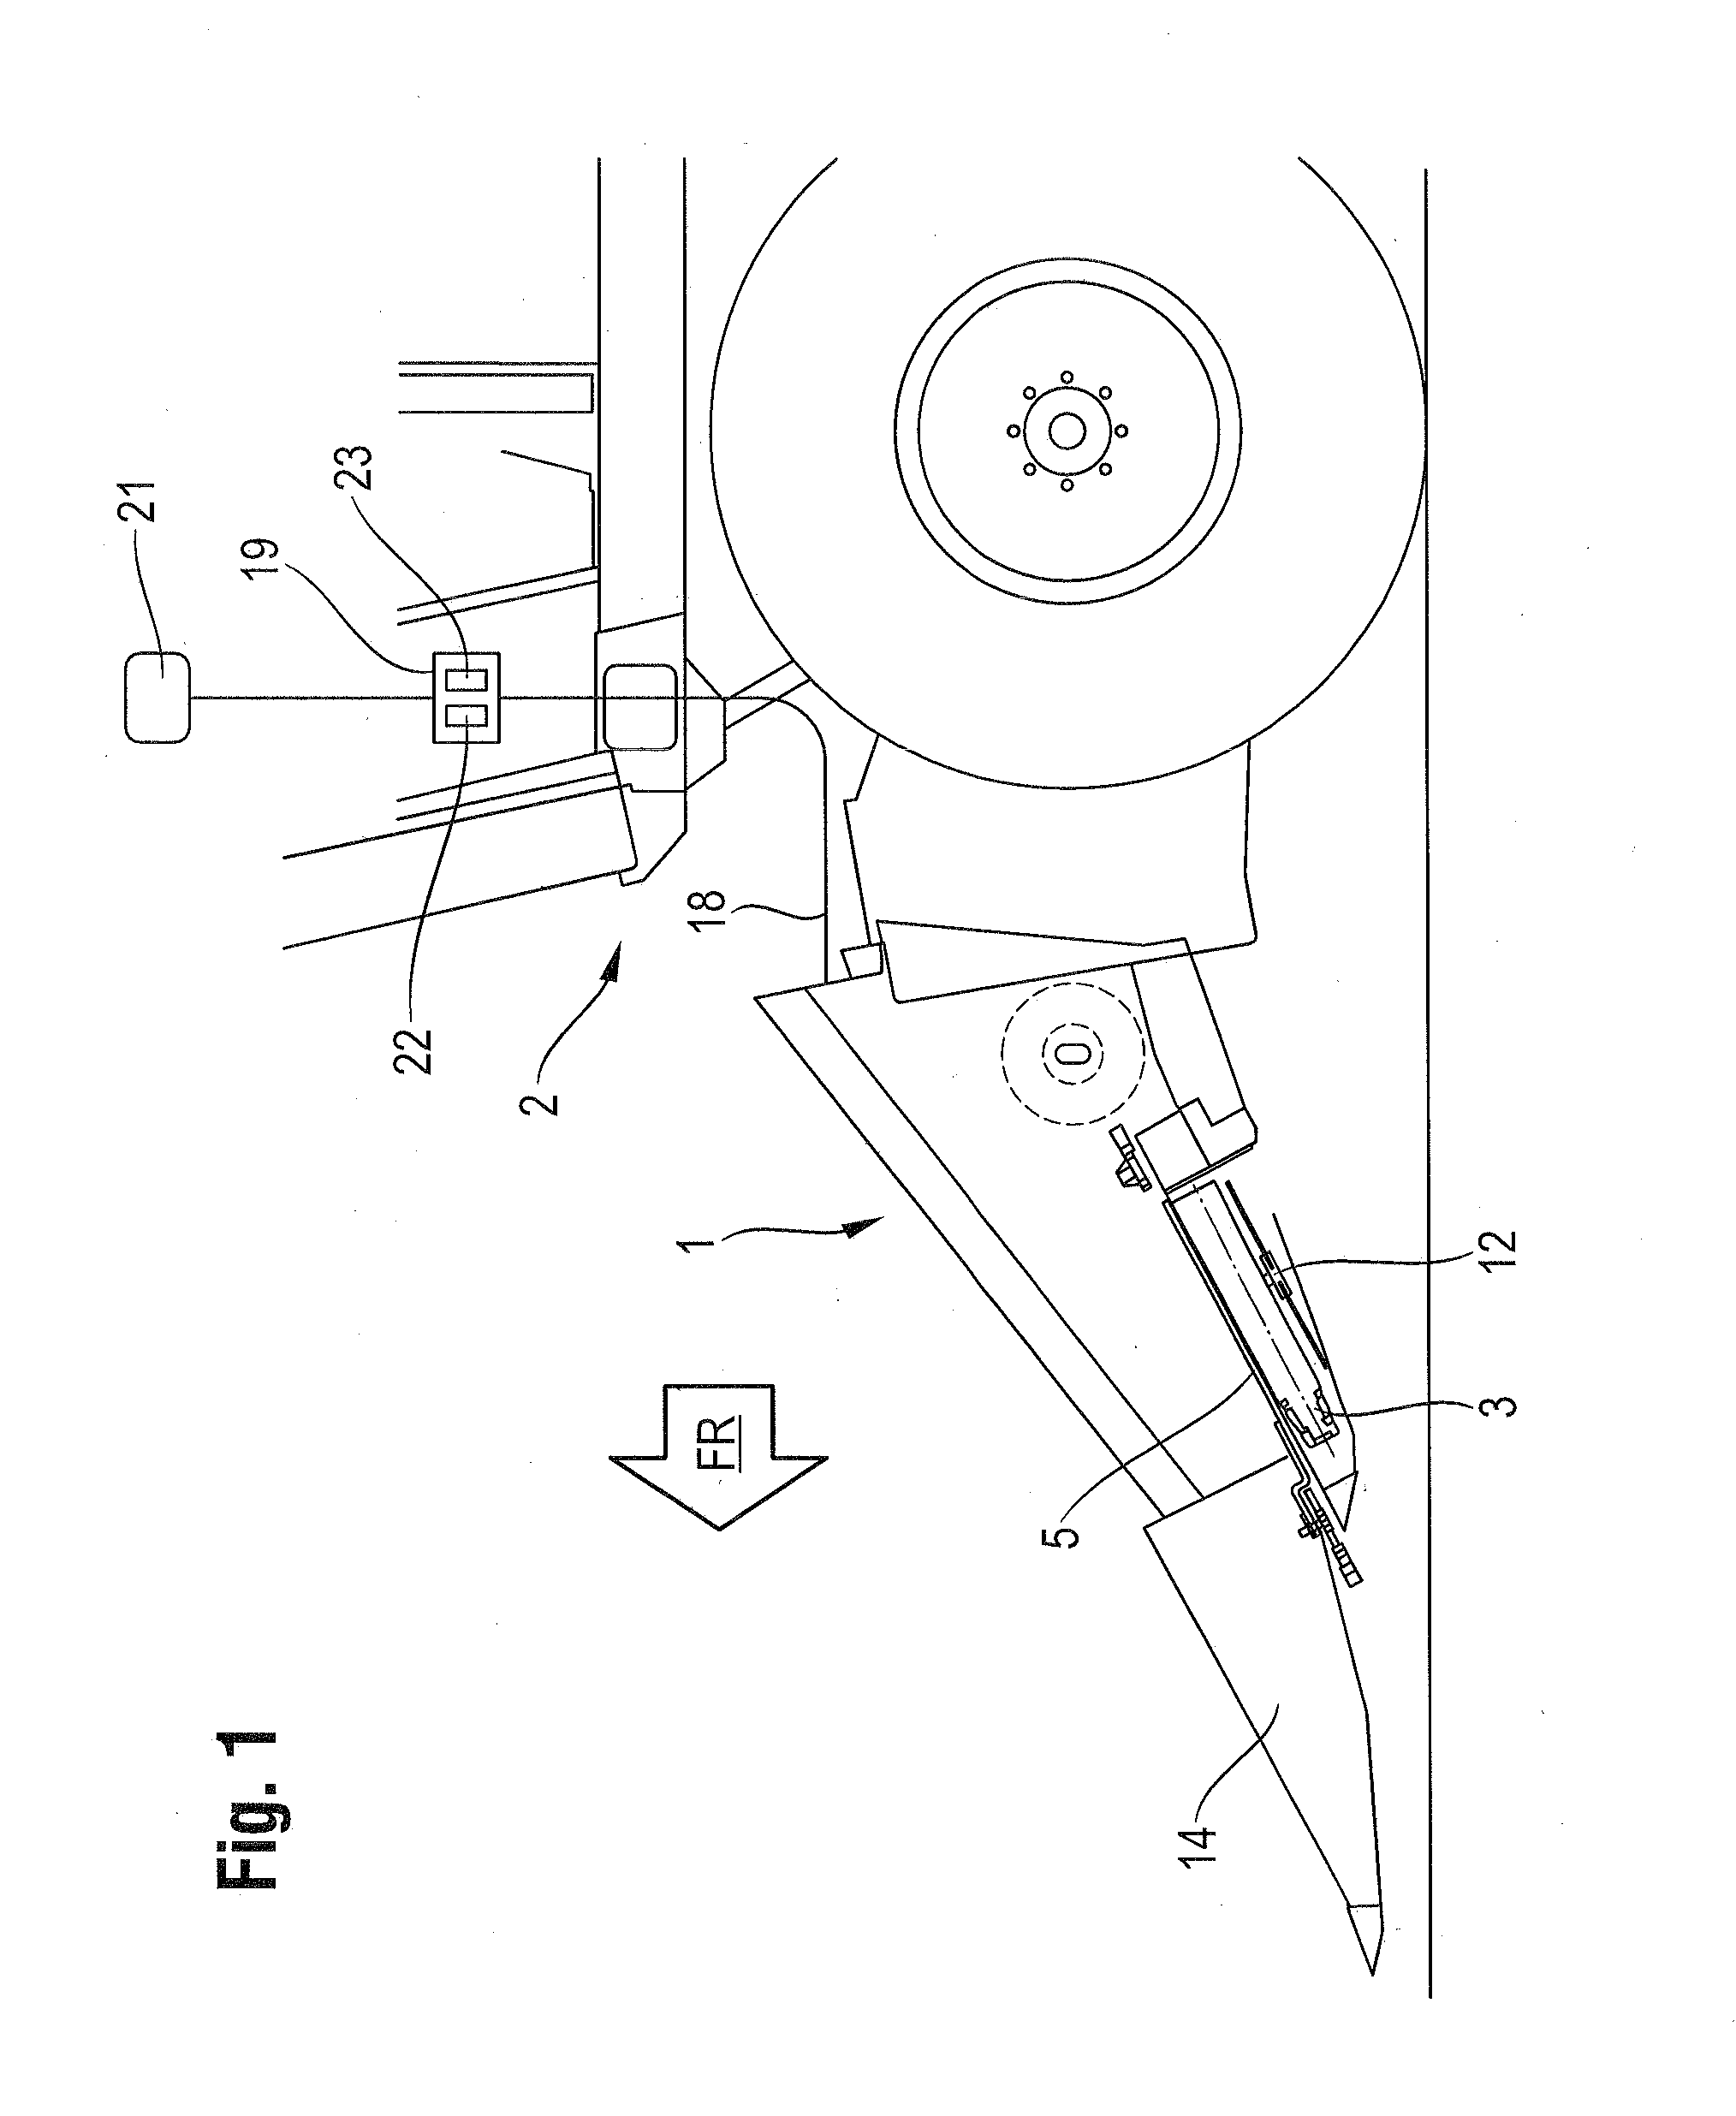 Method for operating a snapping unit having stripper plates with variable spacing